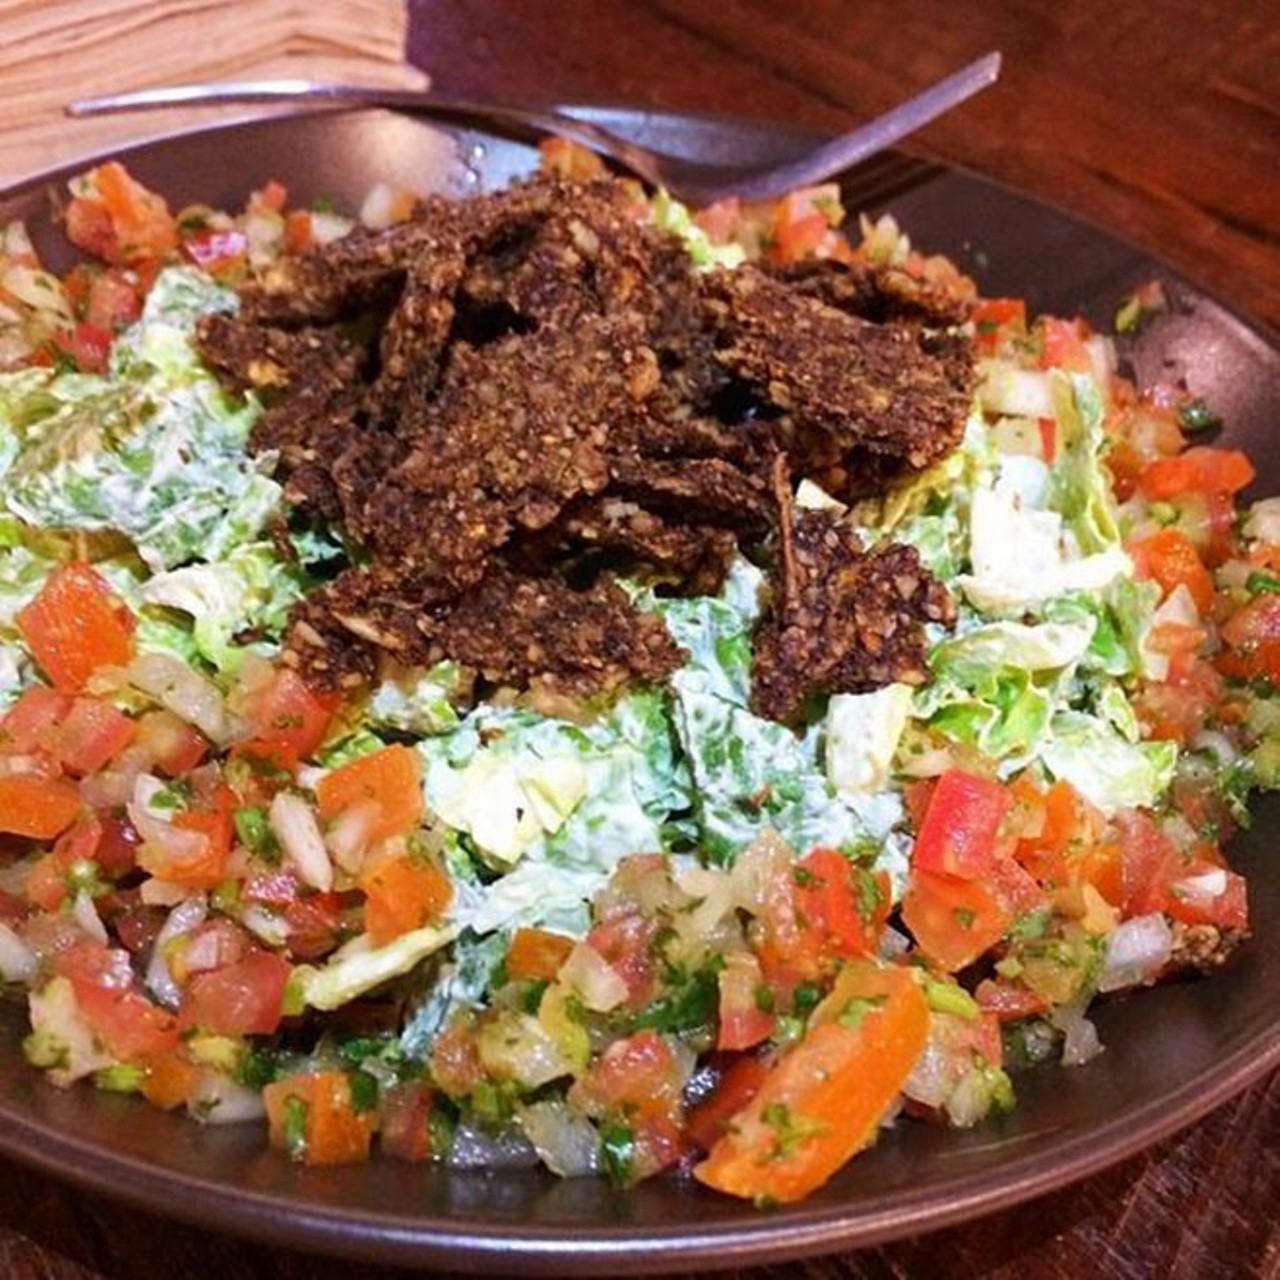 Taco salad at Skyebird Juice Bar? & Experimental Kitchen
3201 Corinne Drive, 407-758-9311
All raw, served in a Mason jar, it's a generous pile of romaine topped with fresh salsa, walnut "taco meat" and creamy cashew "sour cream."
Photo via Dafoodie